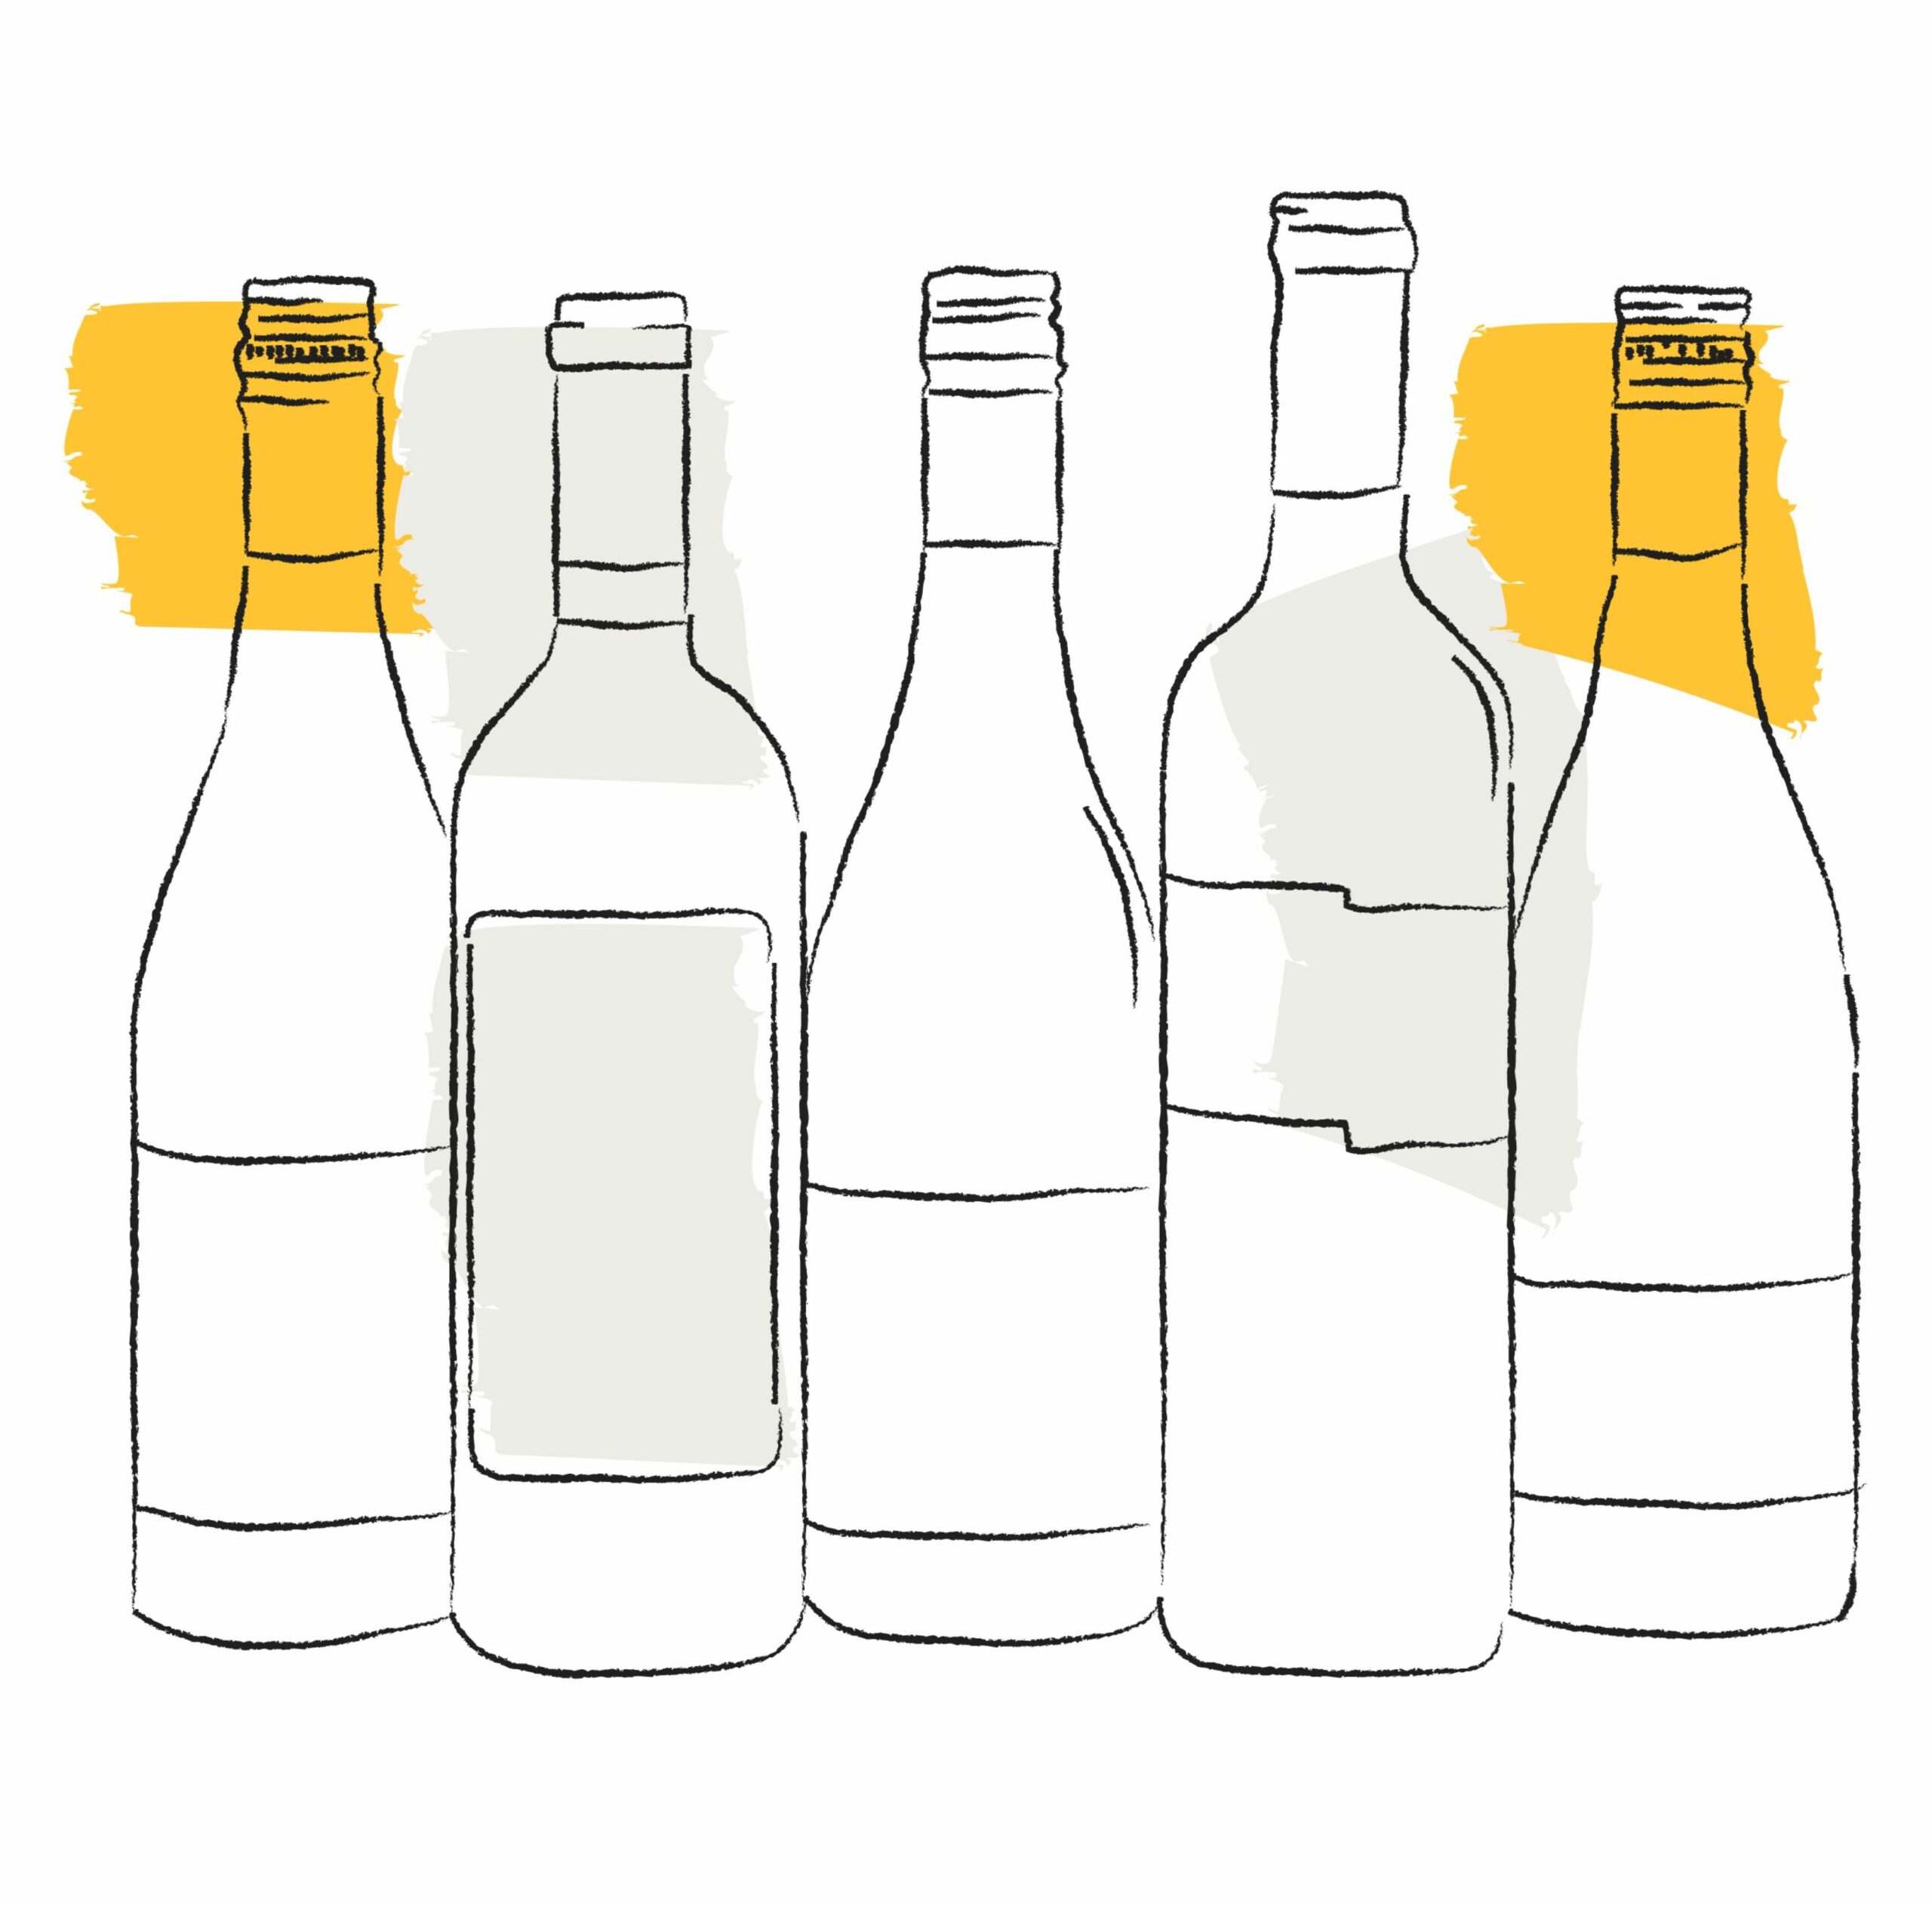 hand-drawn illustration of wine bottles with yellow and gray swatches